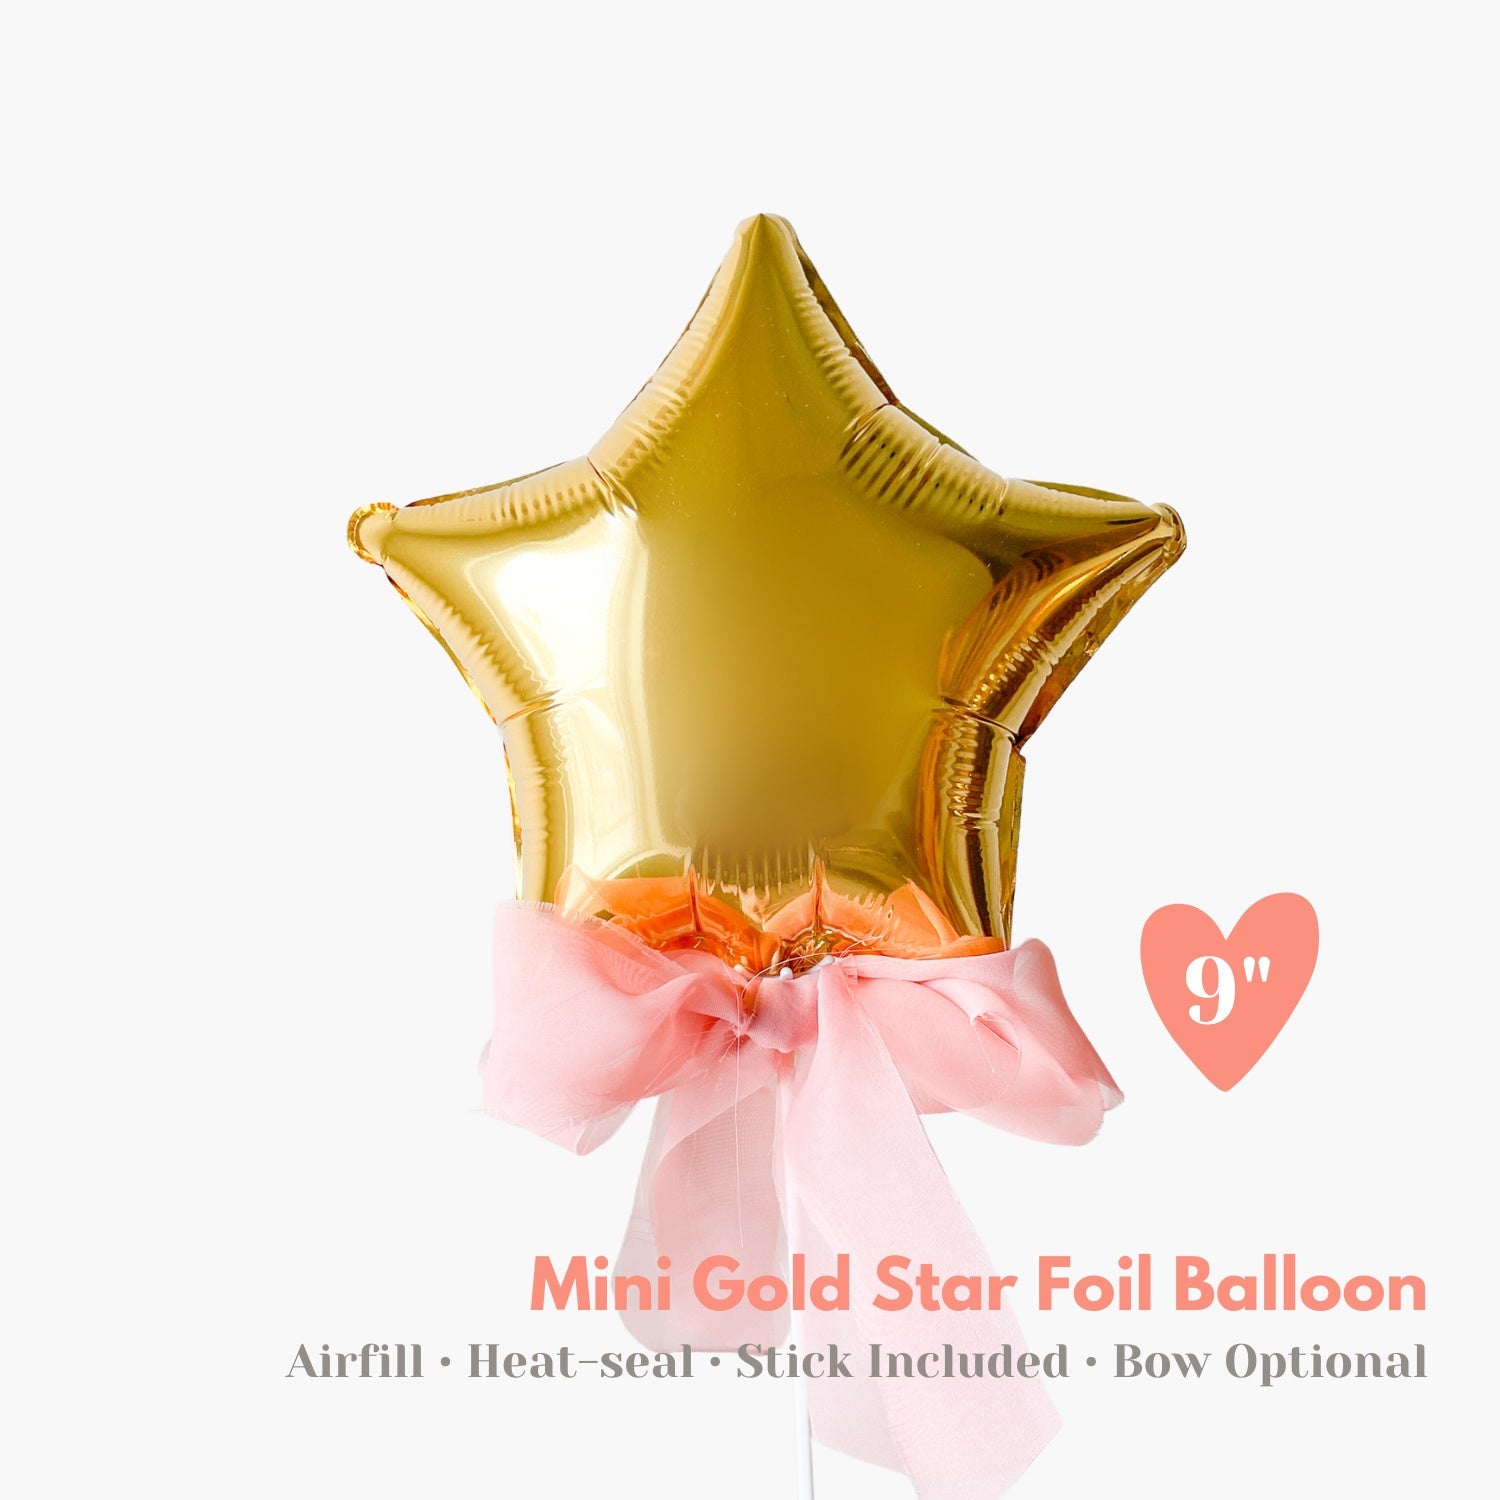 Air-fill Mini Gold Star Balloon with Bow - Kids Birthday Party Balloon Decoration - Photo Props - Party Favors